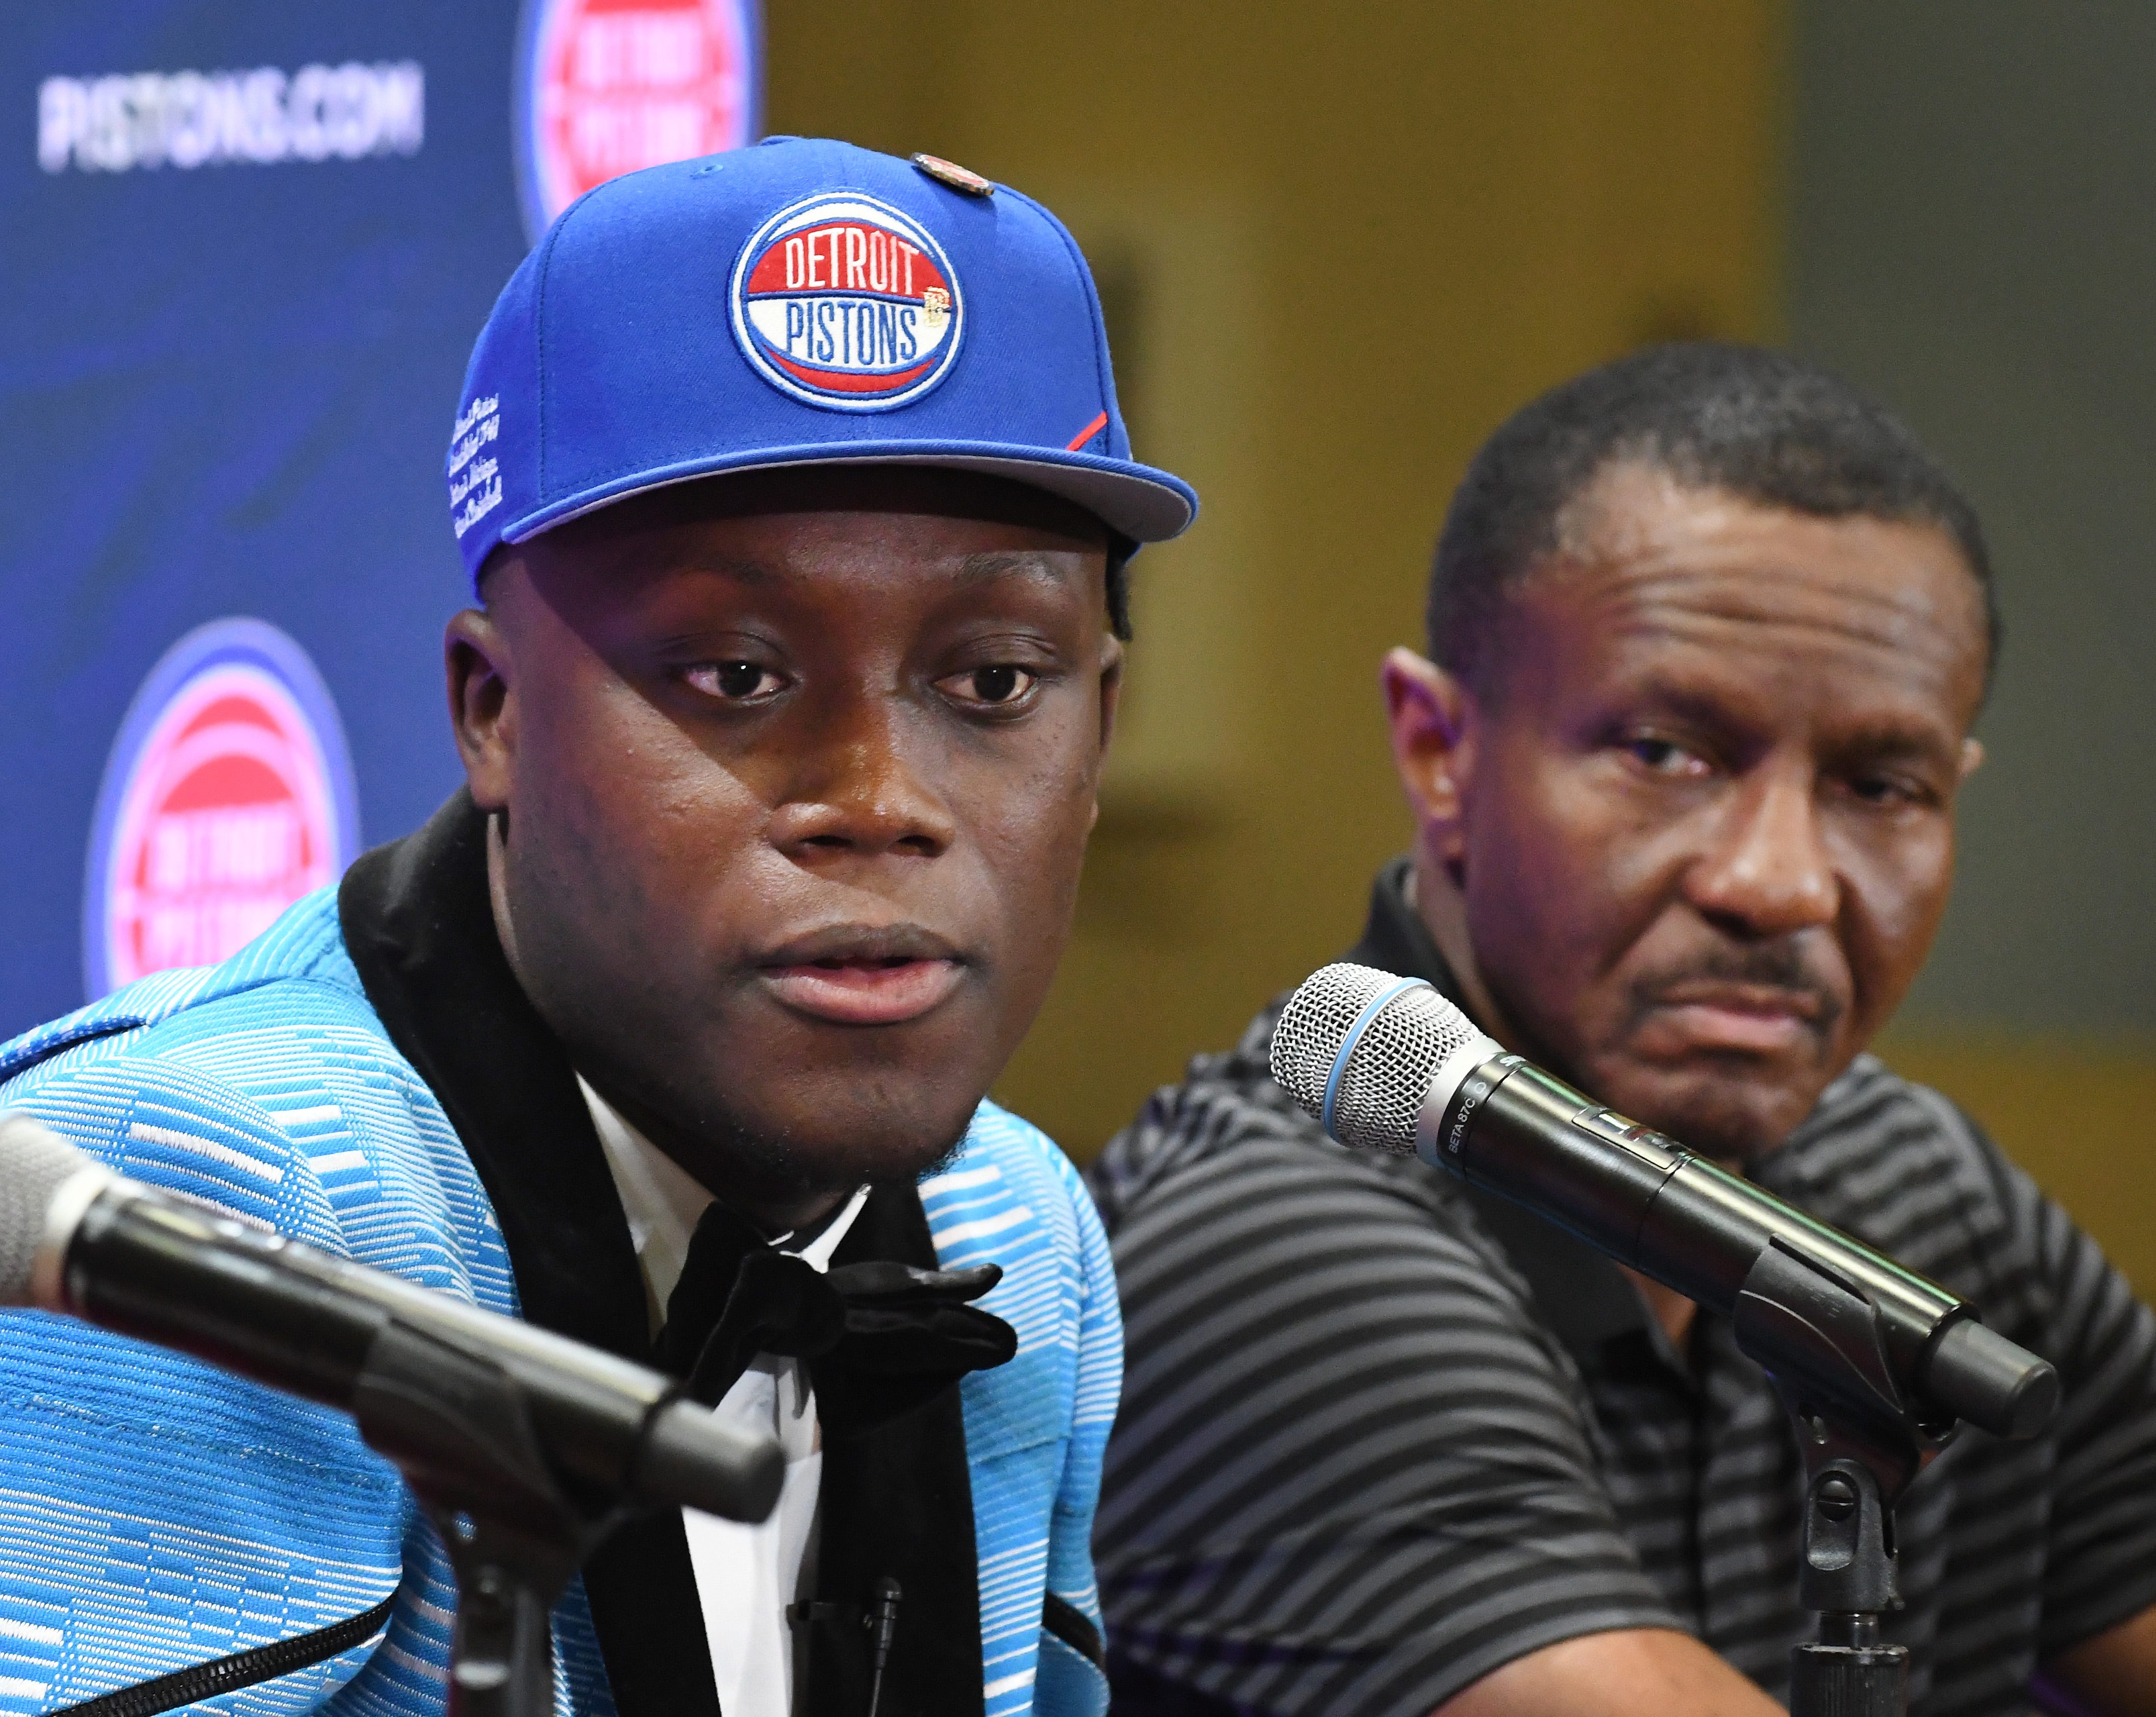 Pistons first round draft pick Sekou Doumbouya, with head coach Dwane Casey, addresses the media during a press conference.